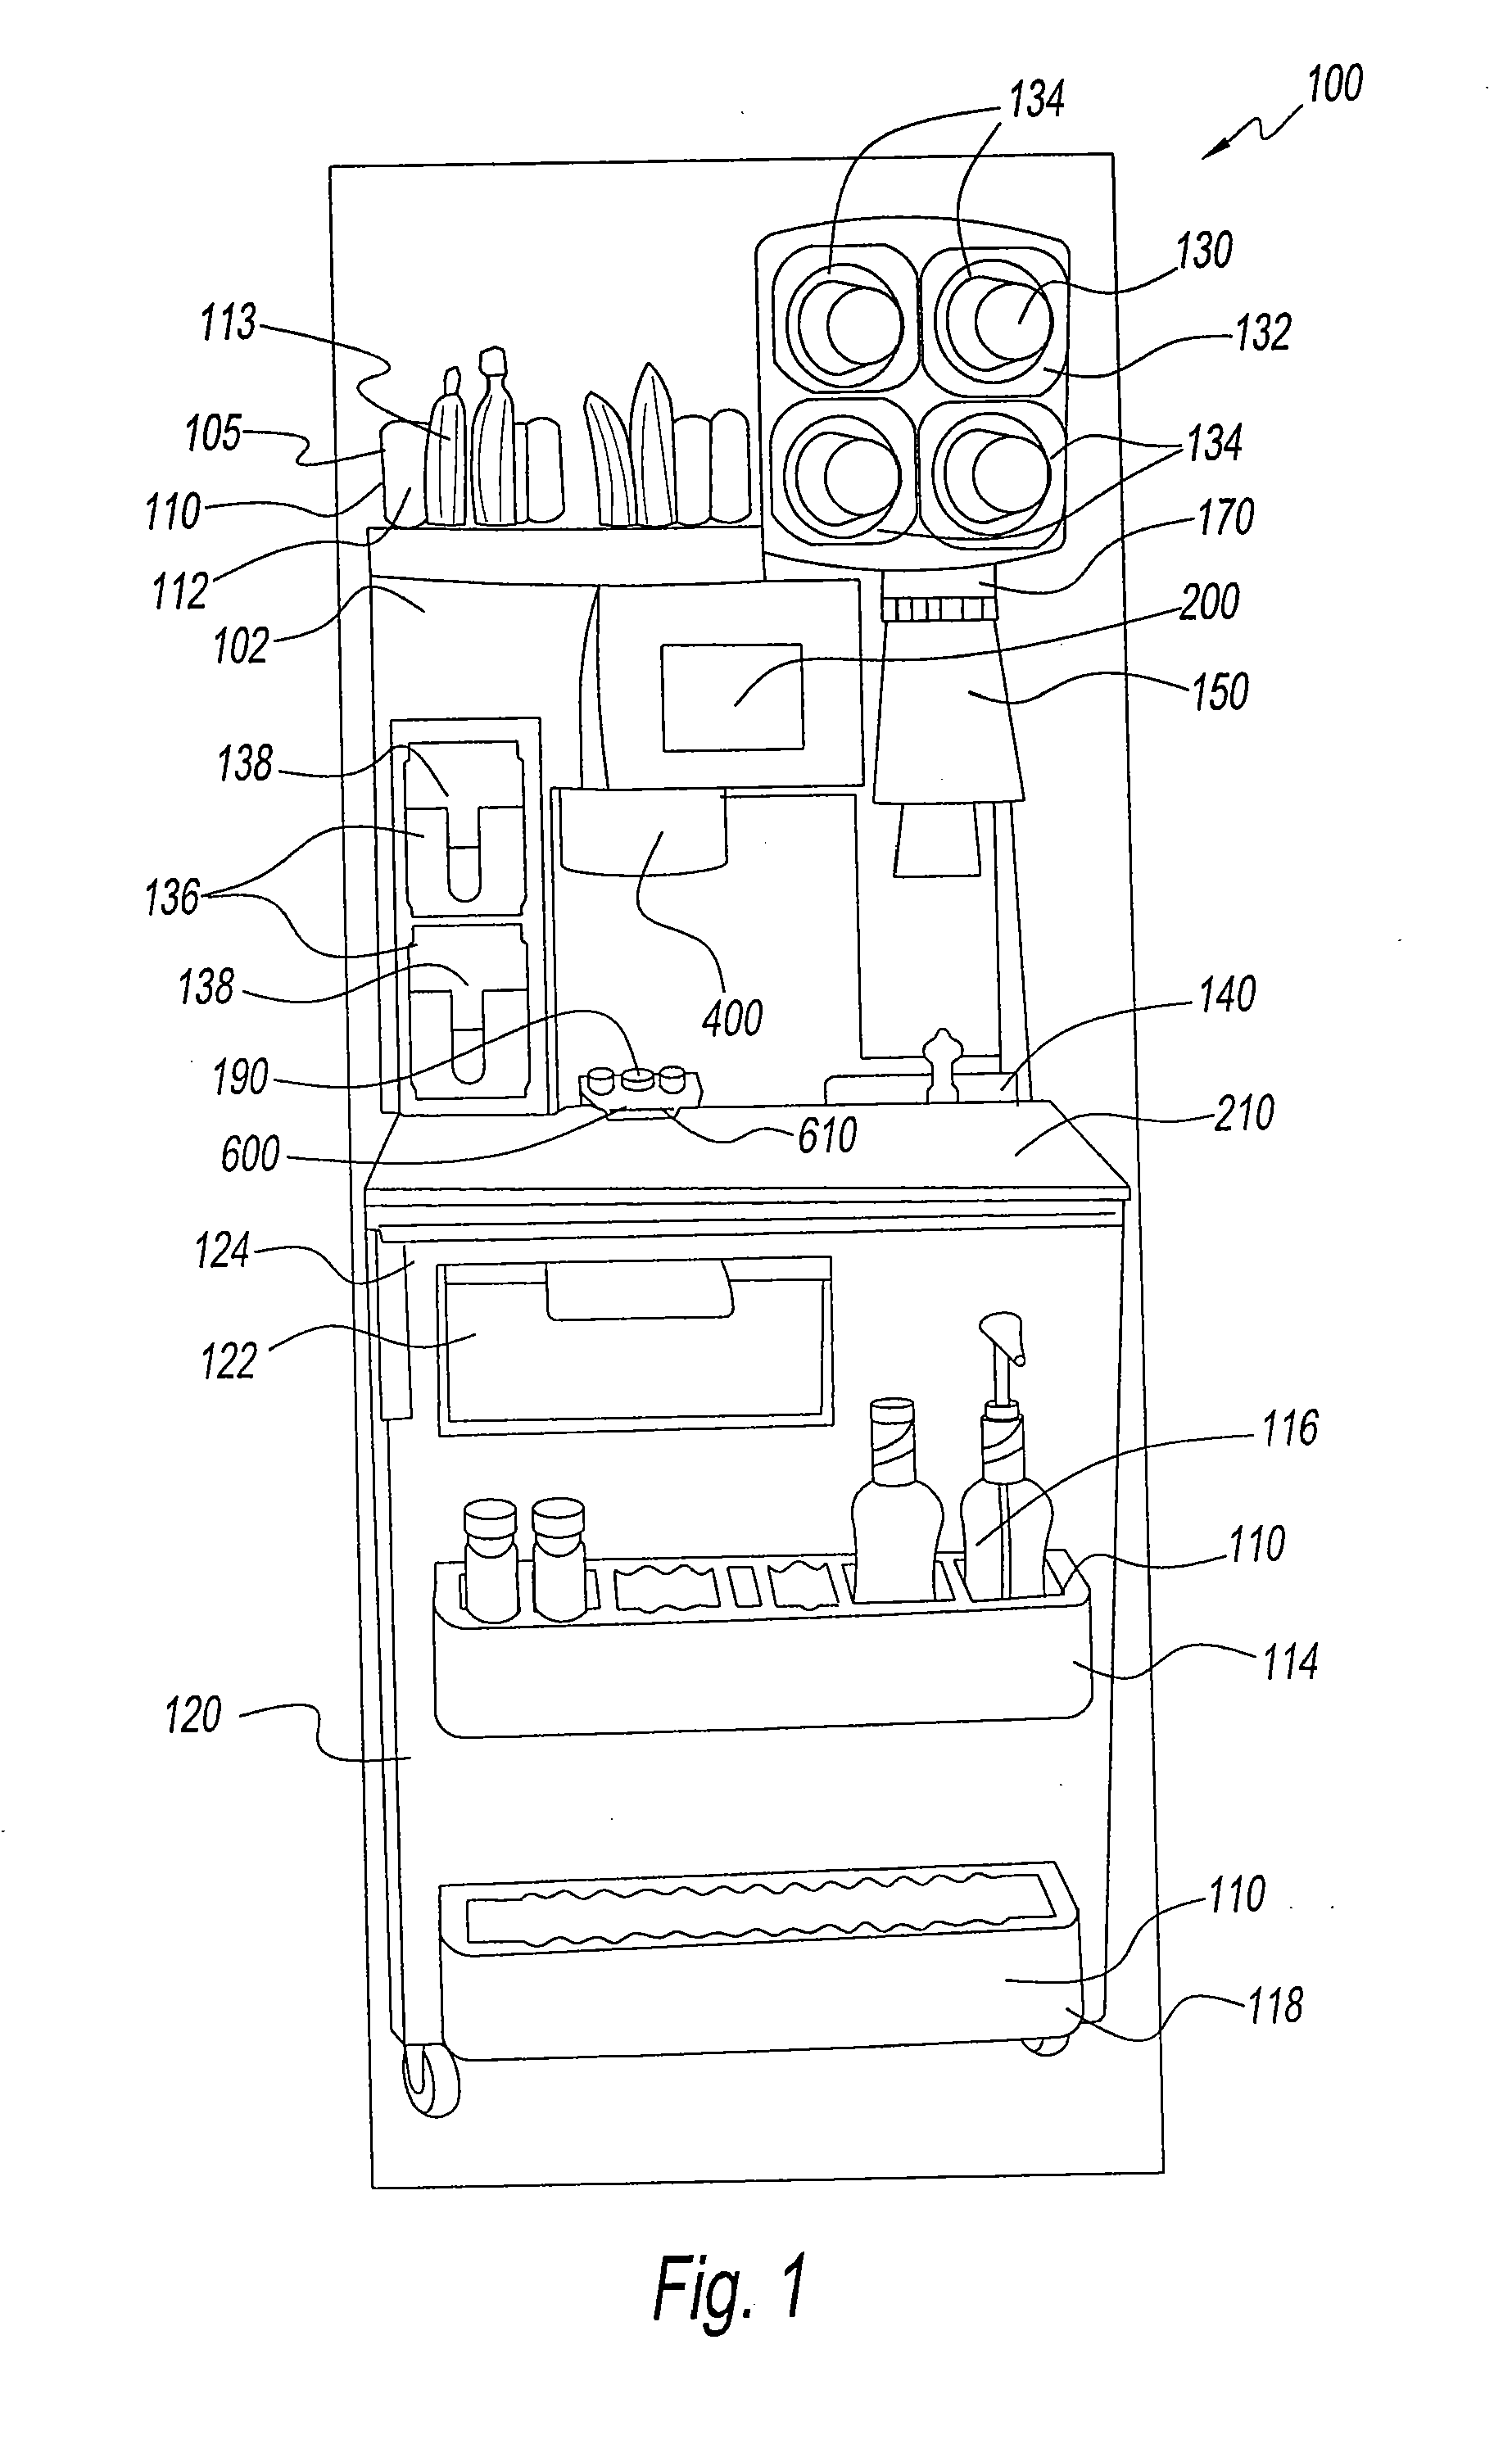 Method and system for measuring ingredients in a container of a beverage dispenser